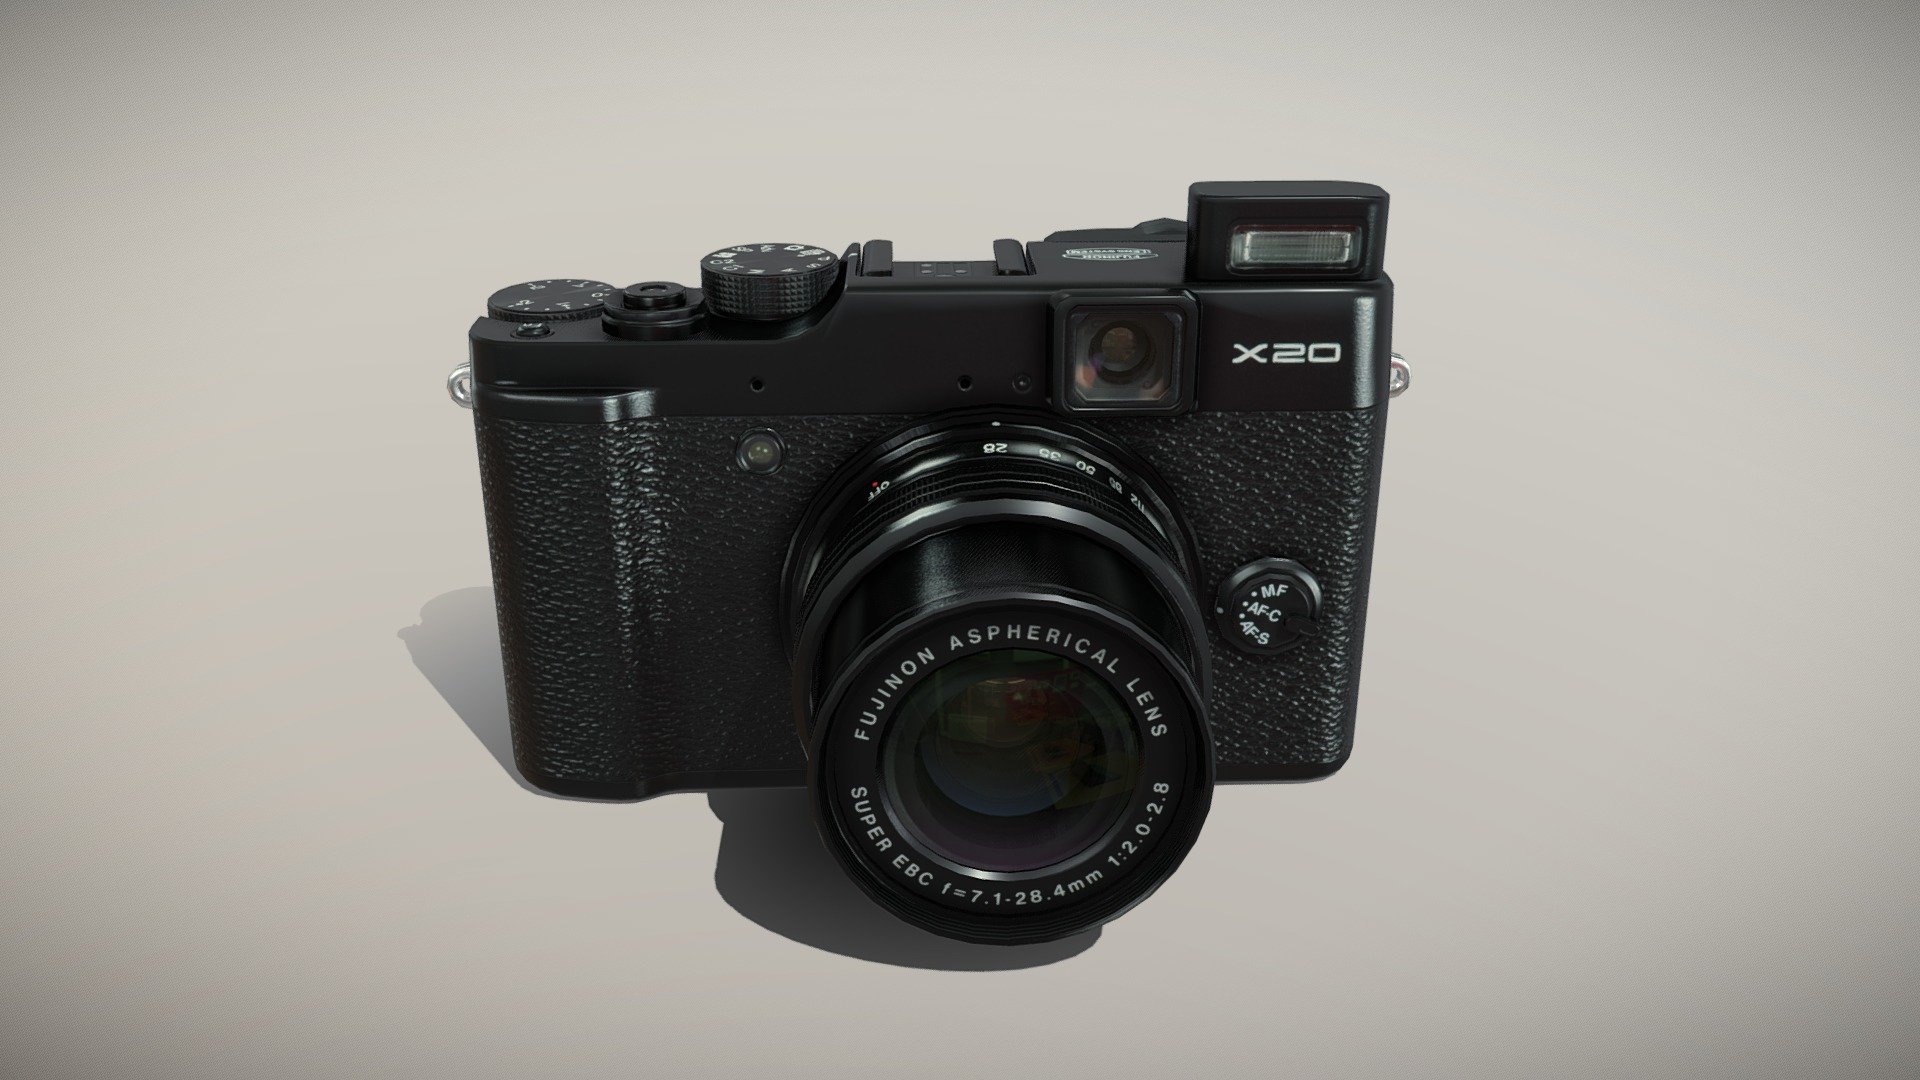 •   Let me present to you high-quality low-poly 3D model Fujifilm FinePix X20 Black. Modeling was made with ortho-photos of real camera that is why all details of design are recreated most authentically.

•    This model consists of a few meshes, it is low-polygonal and it has only two materials (Body and Glass of Lens).

•   The total of the main textures is 5. Resolution of all textures is 4096 pixels square aspect ratio in .png format. Also there is original texture file .PSD format in separate archive.

•   Polygon count of the model is – 7567.

•   The model has correct dimensions in real-world scale. All parts grouped and named correctly.

•   To use the model in other 3D programs there are scenes saved in formats .fbx, .obj, .DAE, .max (2010 version).

Note: If you see some artifacts on the textures, it means compression works in the Viewer. We recommend setting HD quality for textures. But anyway, original textures have no artifacts 3d model